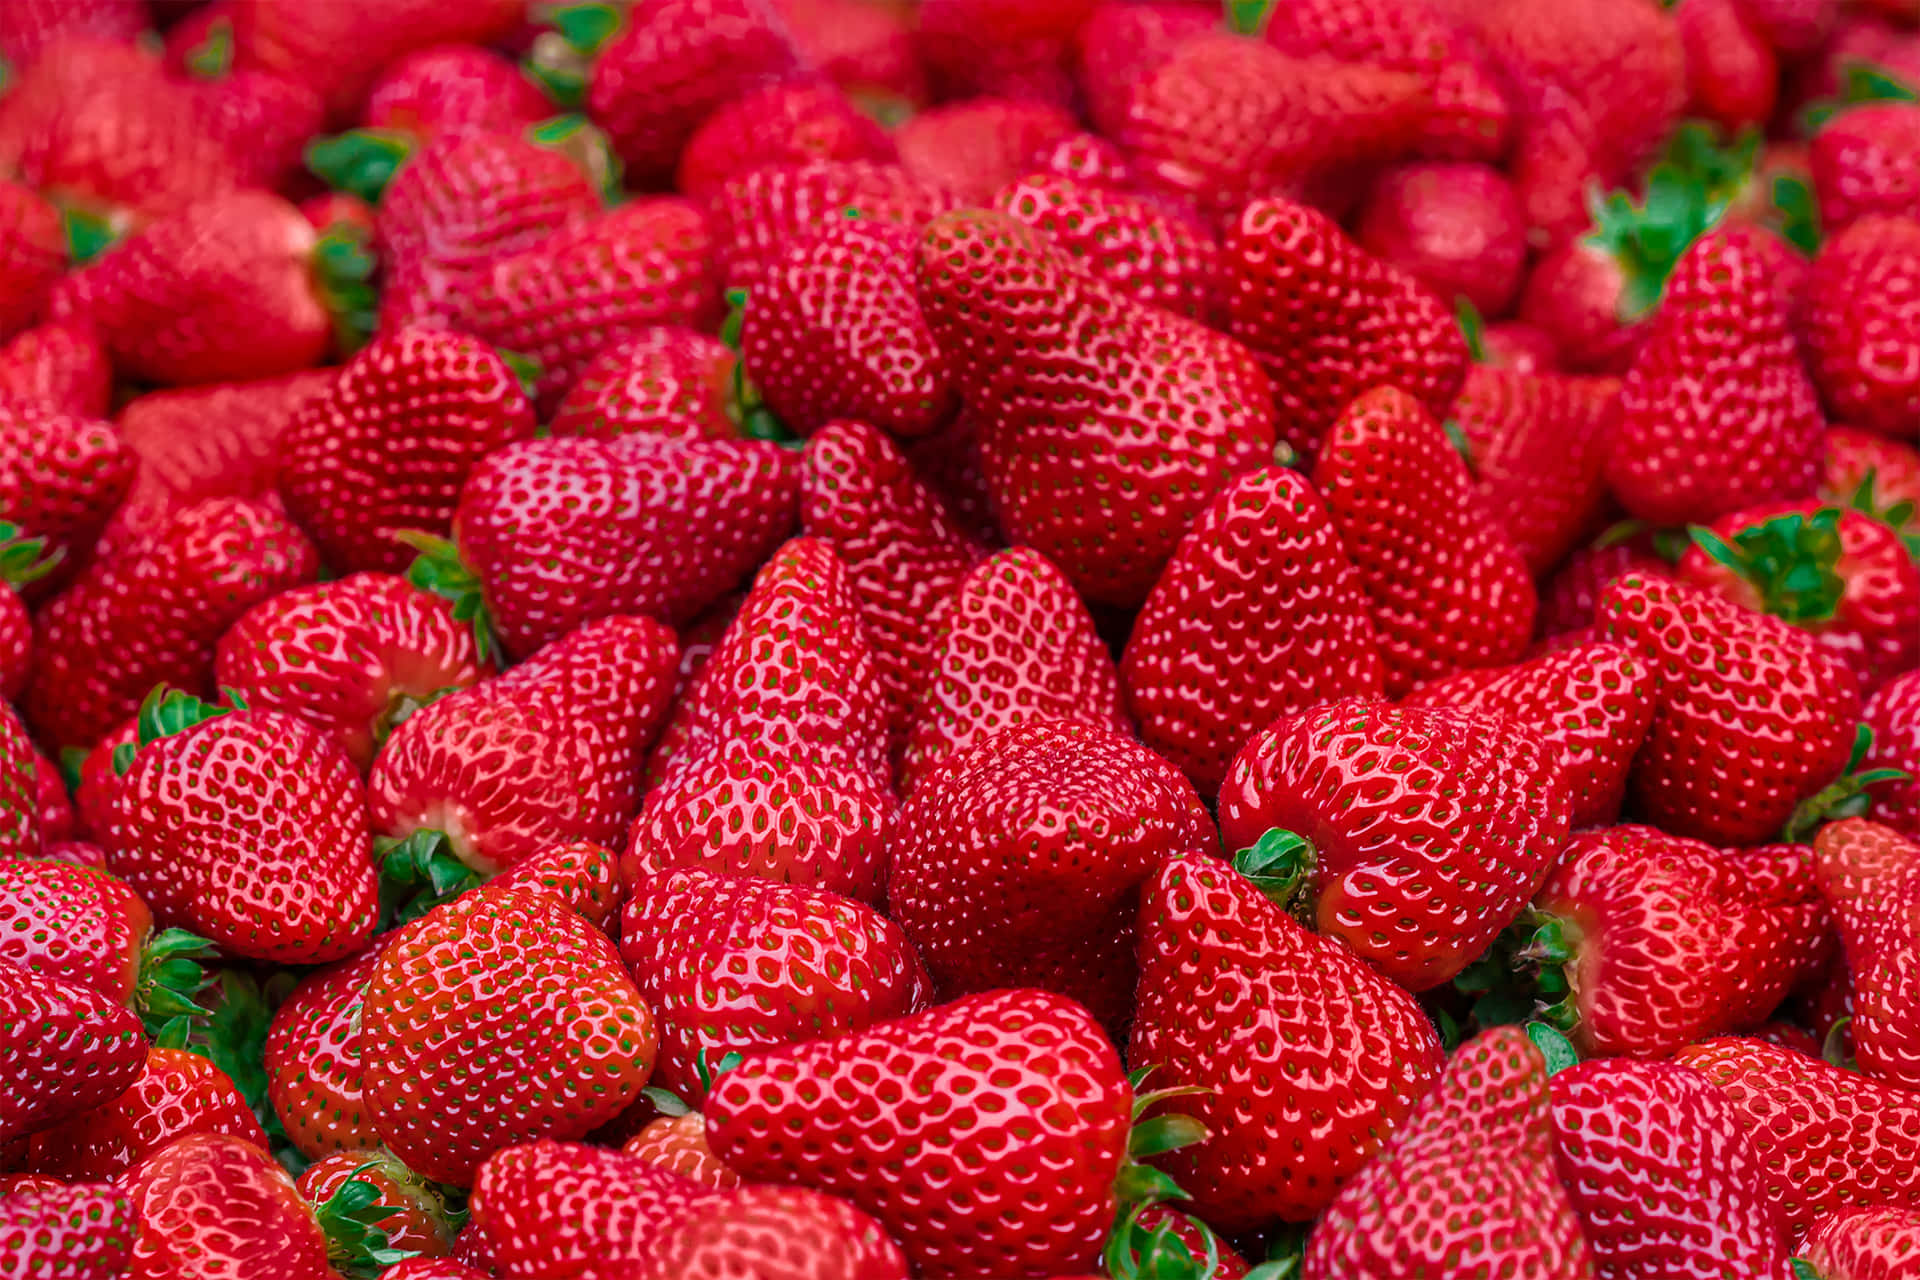 Fresh and sweet strawberry that's ready to be enjoyed!